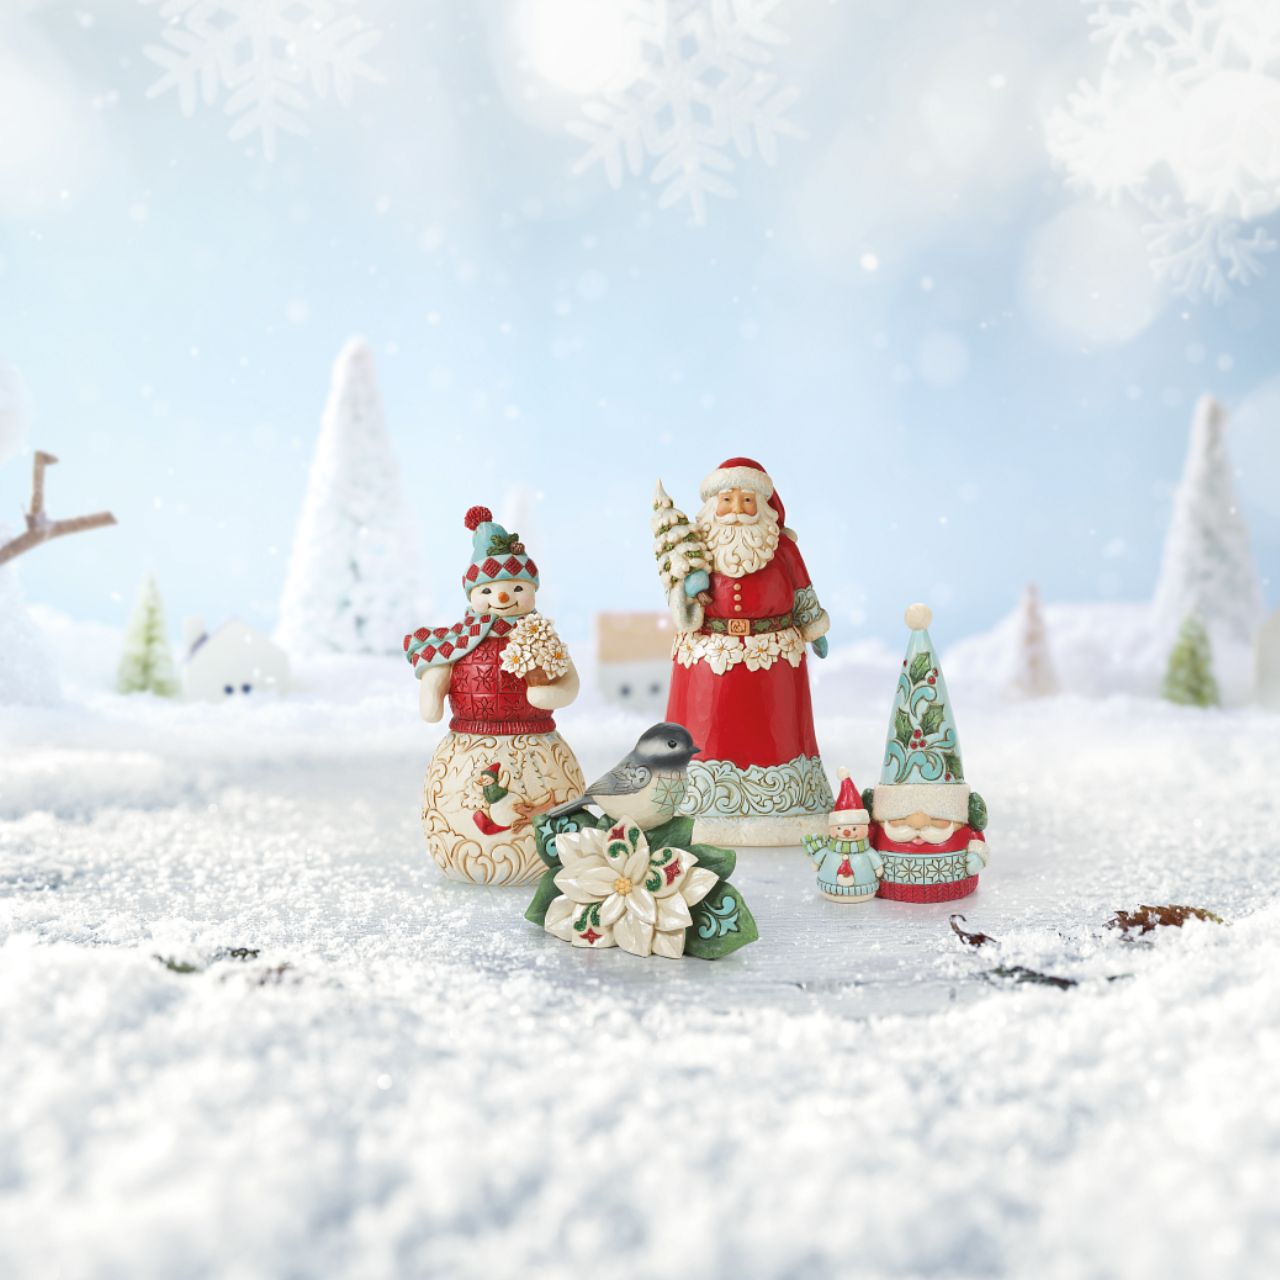 Winter Wonderland Collection Santa Figurine Holding Christmas Tree  Winter Wonderland Collection; Bright jewel tones, metallic shimmering and pearlized finishes and coloured glitter accents. This striking Santa holding a glittering Tree is the perfect addition to any Winter Wonderland Collection.